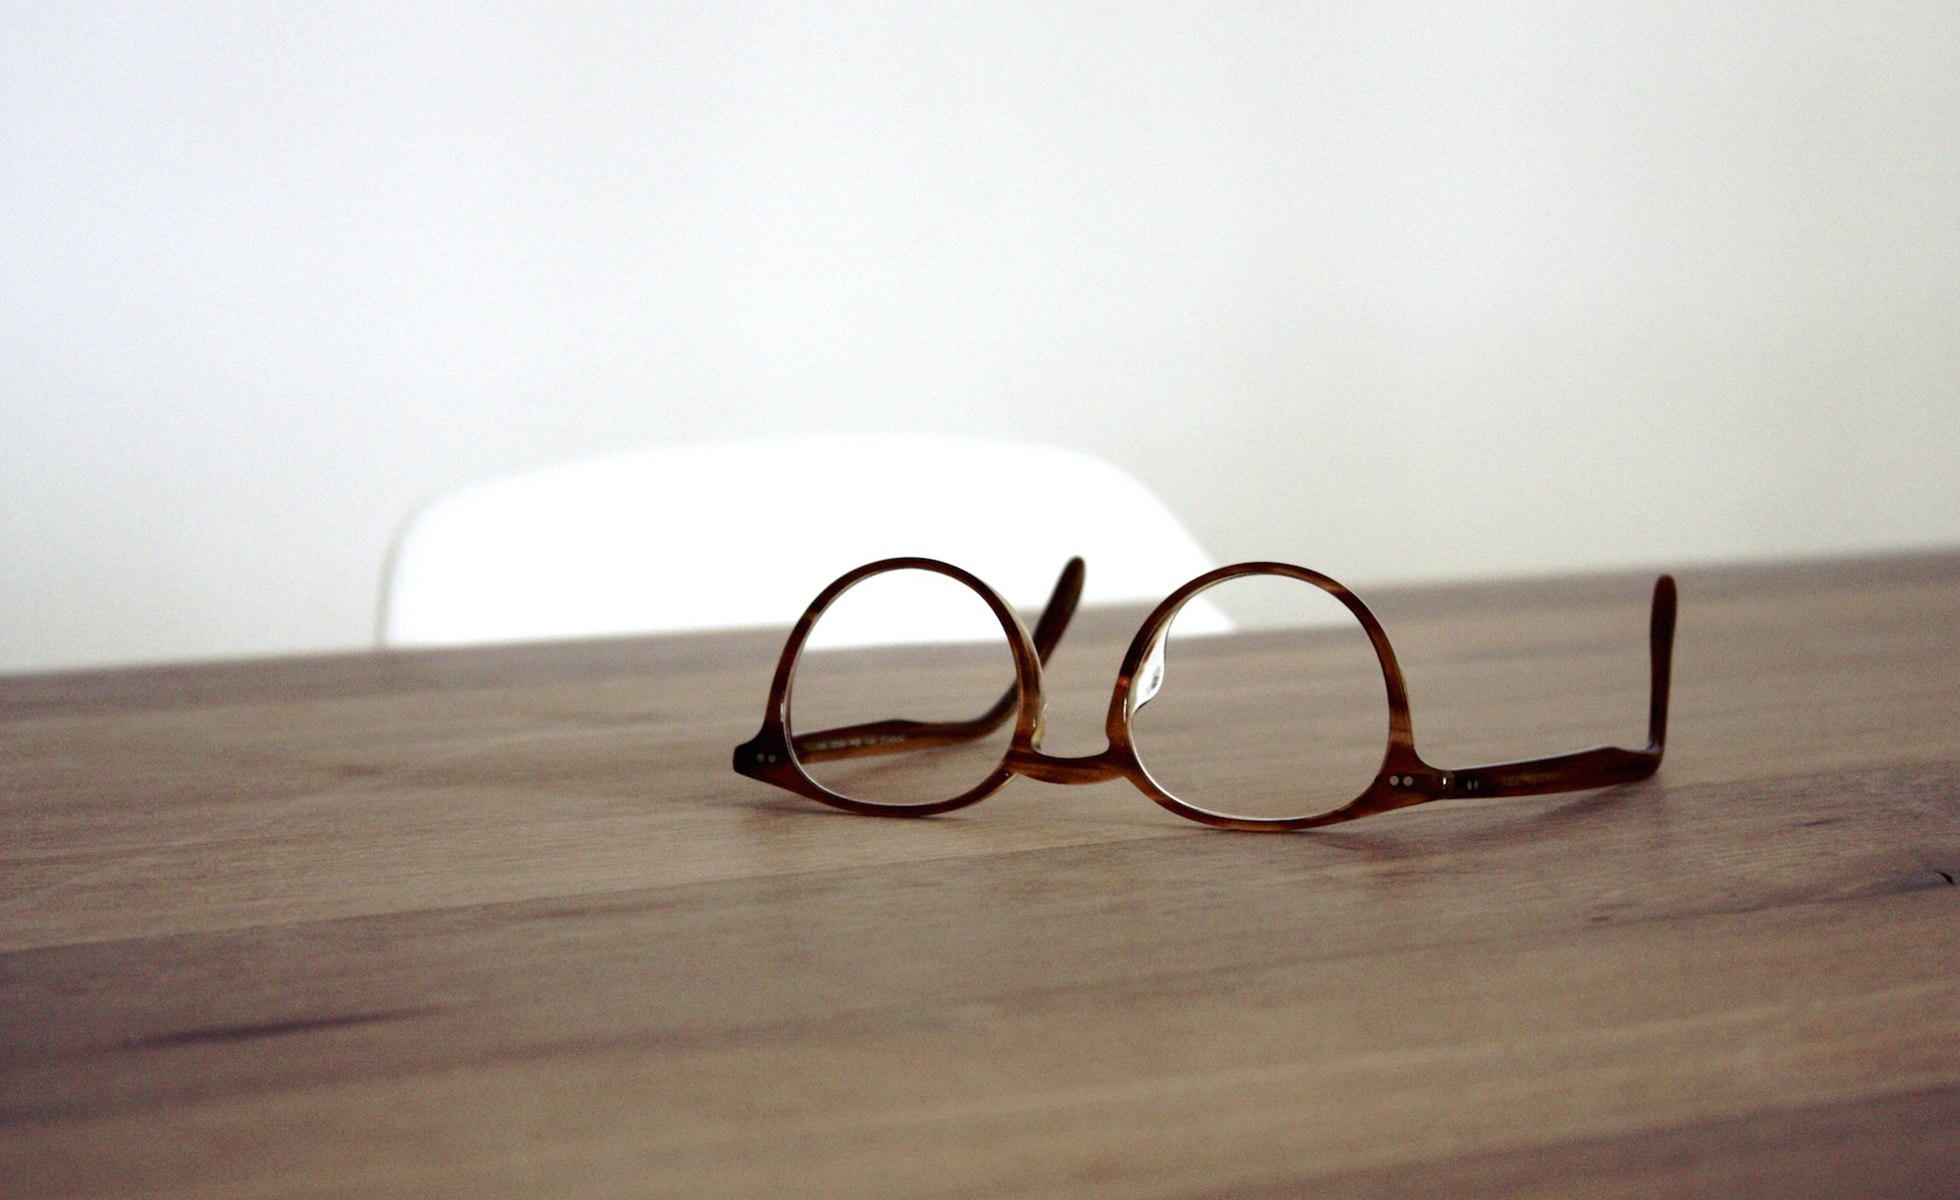 Eyeglasses resting on a table.